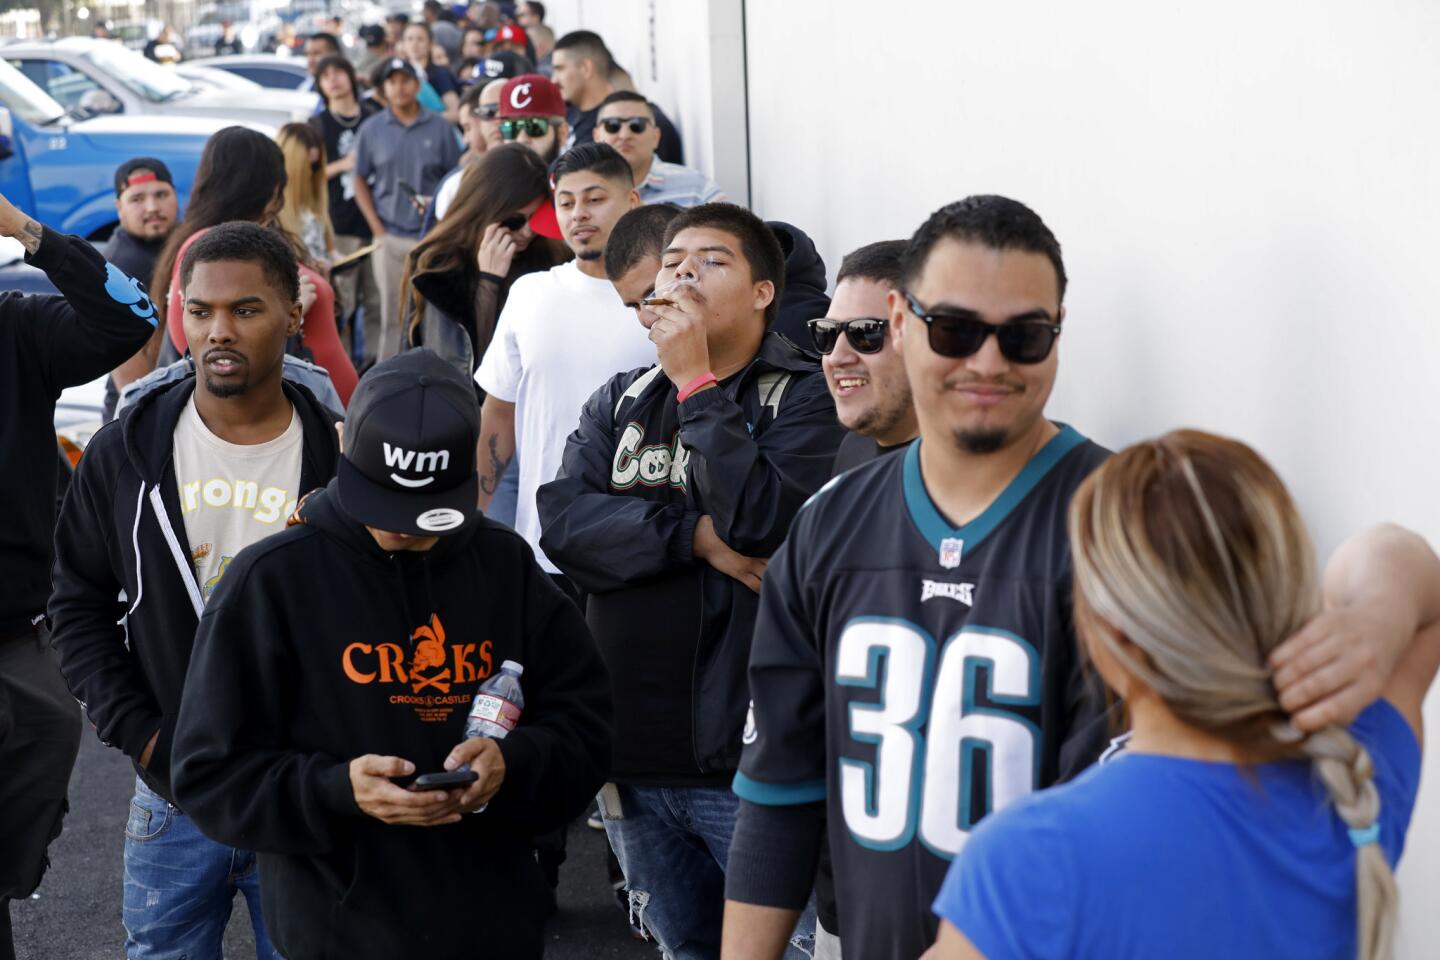 Anthony Ramirez, center, of Culver City, waits in line at the grand opening of Cookies Los Angeles, the city's first marijuana dispensary selling recreation use cannabis under Proposition 64.